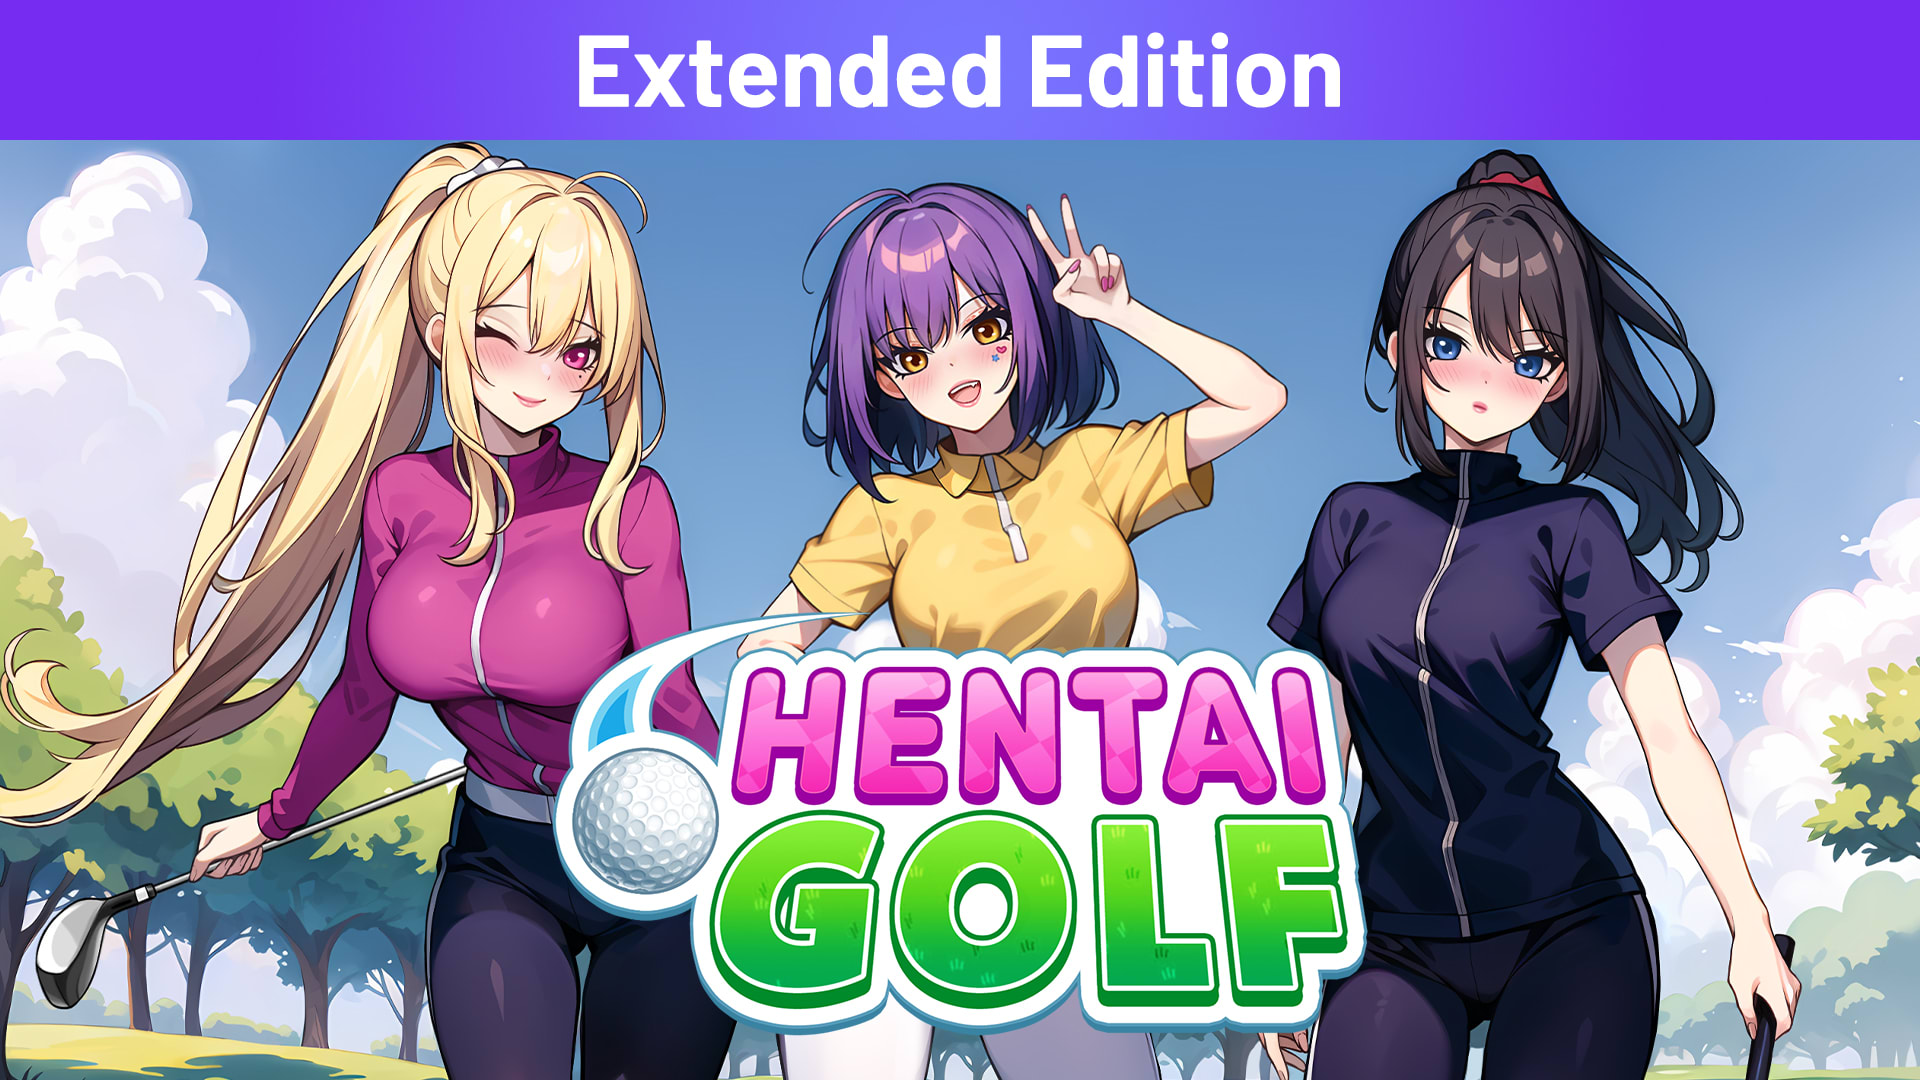 Hentai Golf Extended Edition